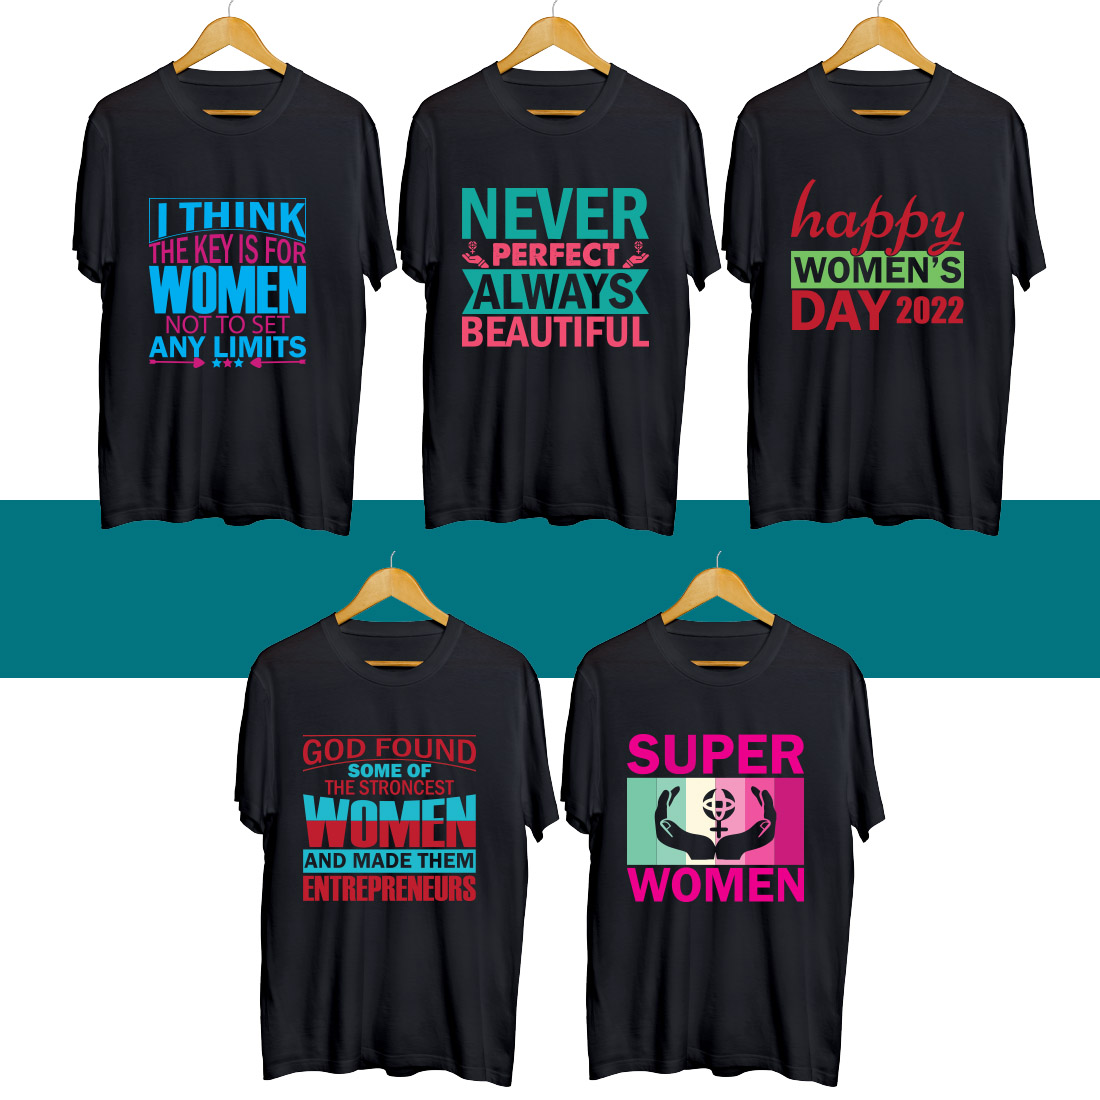 Four t - shirts with different slogans on them.